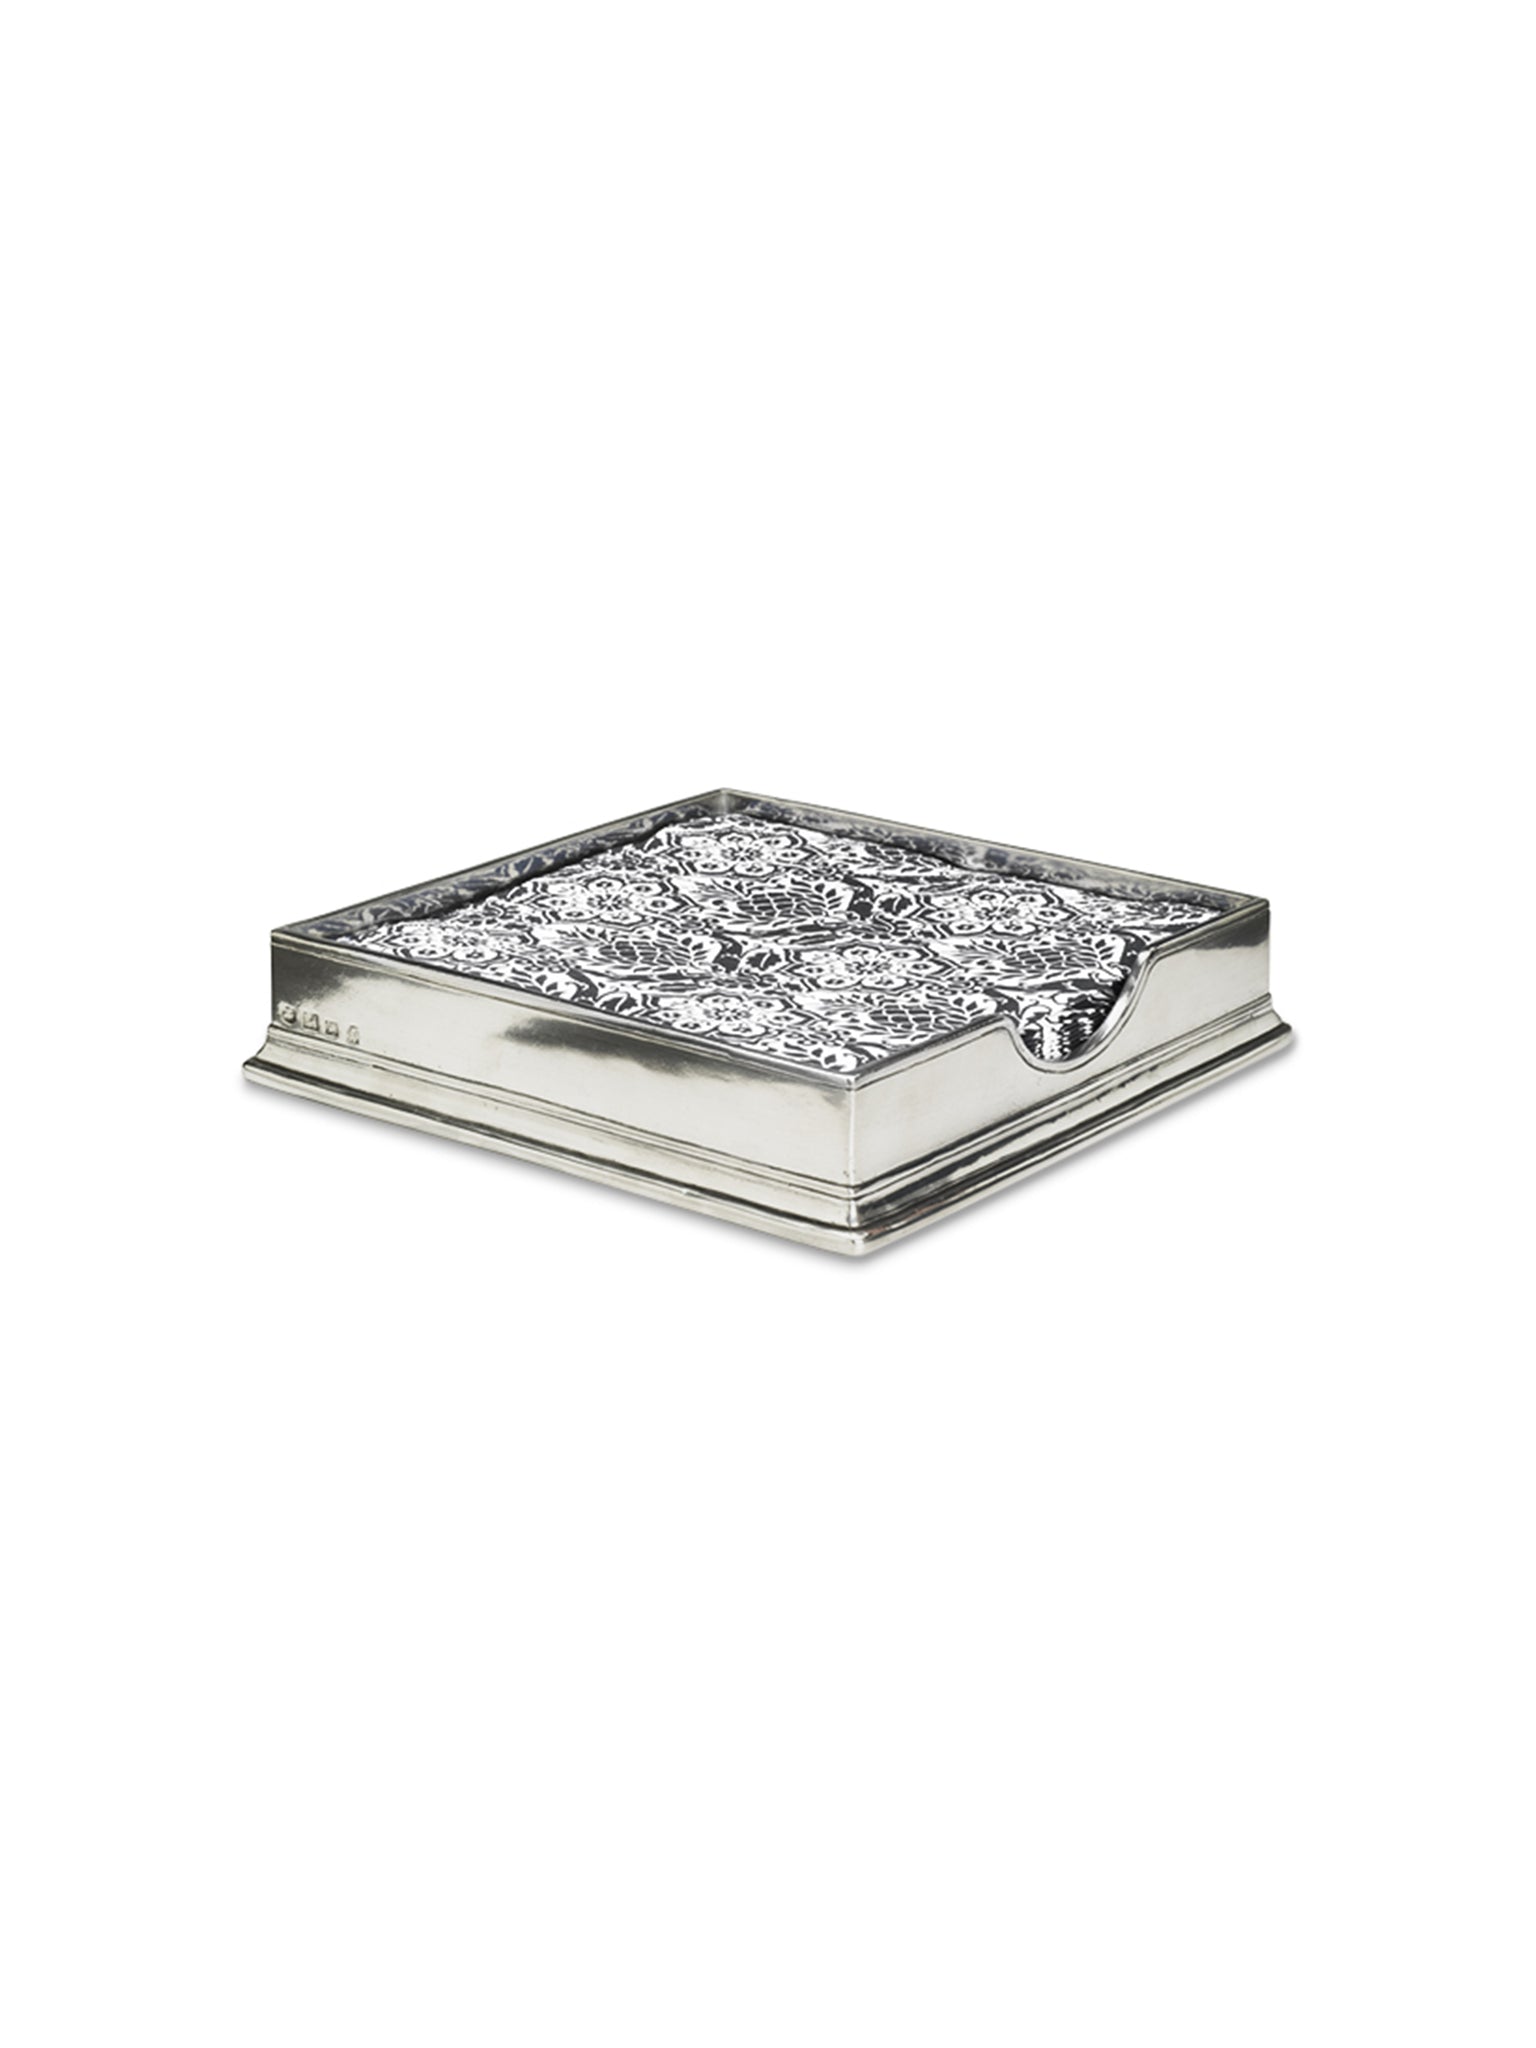 MATCH Pewter Luncheon Napkin Box Weston Table